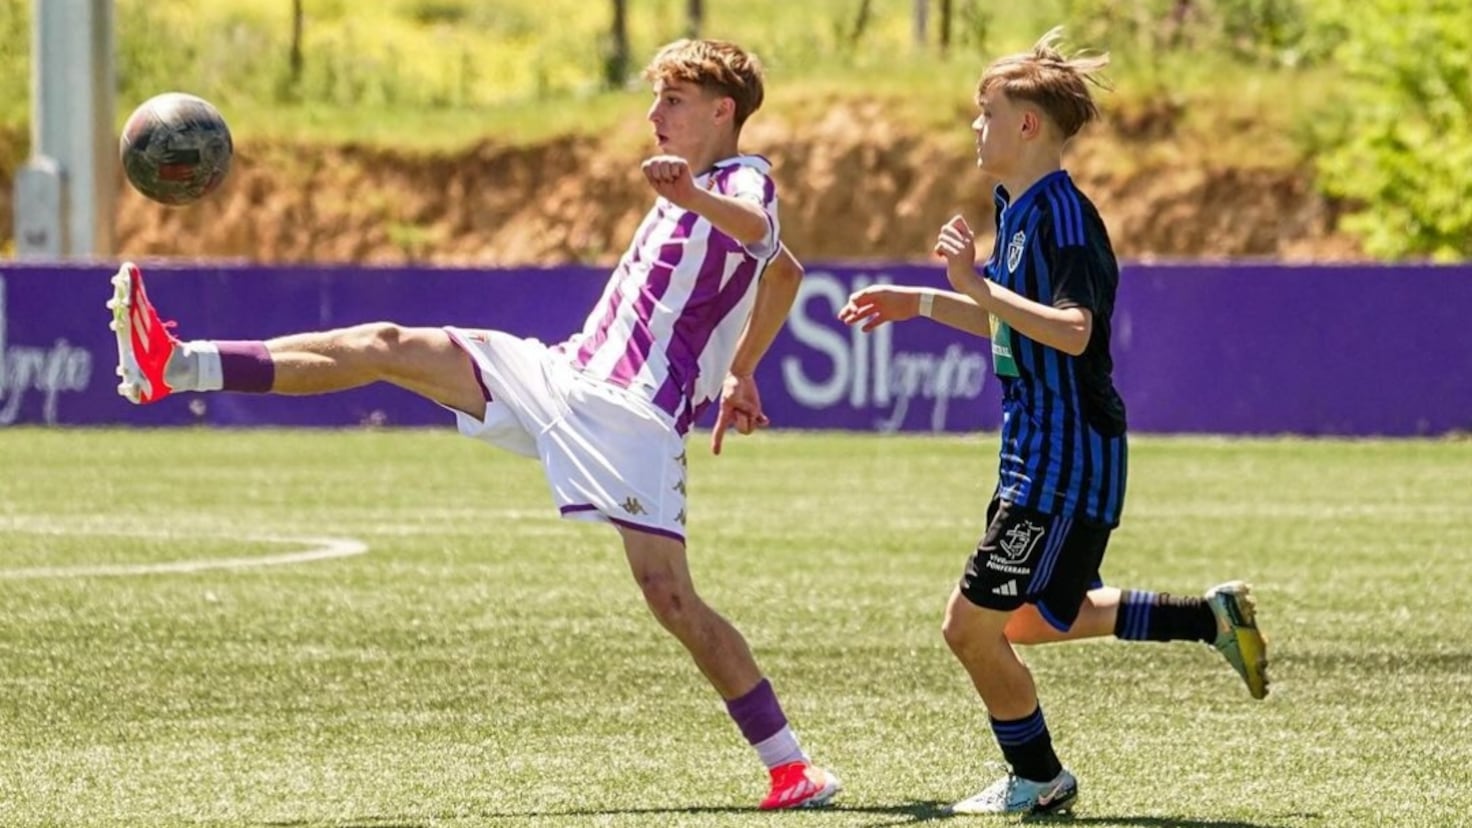 Rising Star: 14-Year-Old Prodigy Miguel Redondo Shines in Spain's Inaugural U14 Squad